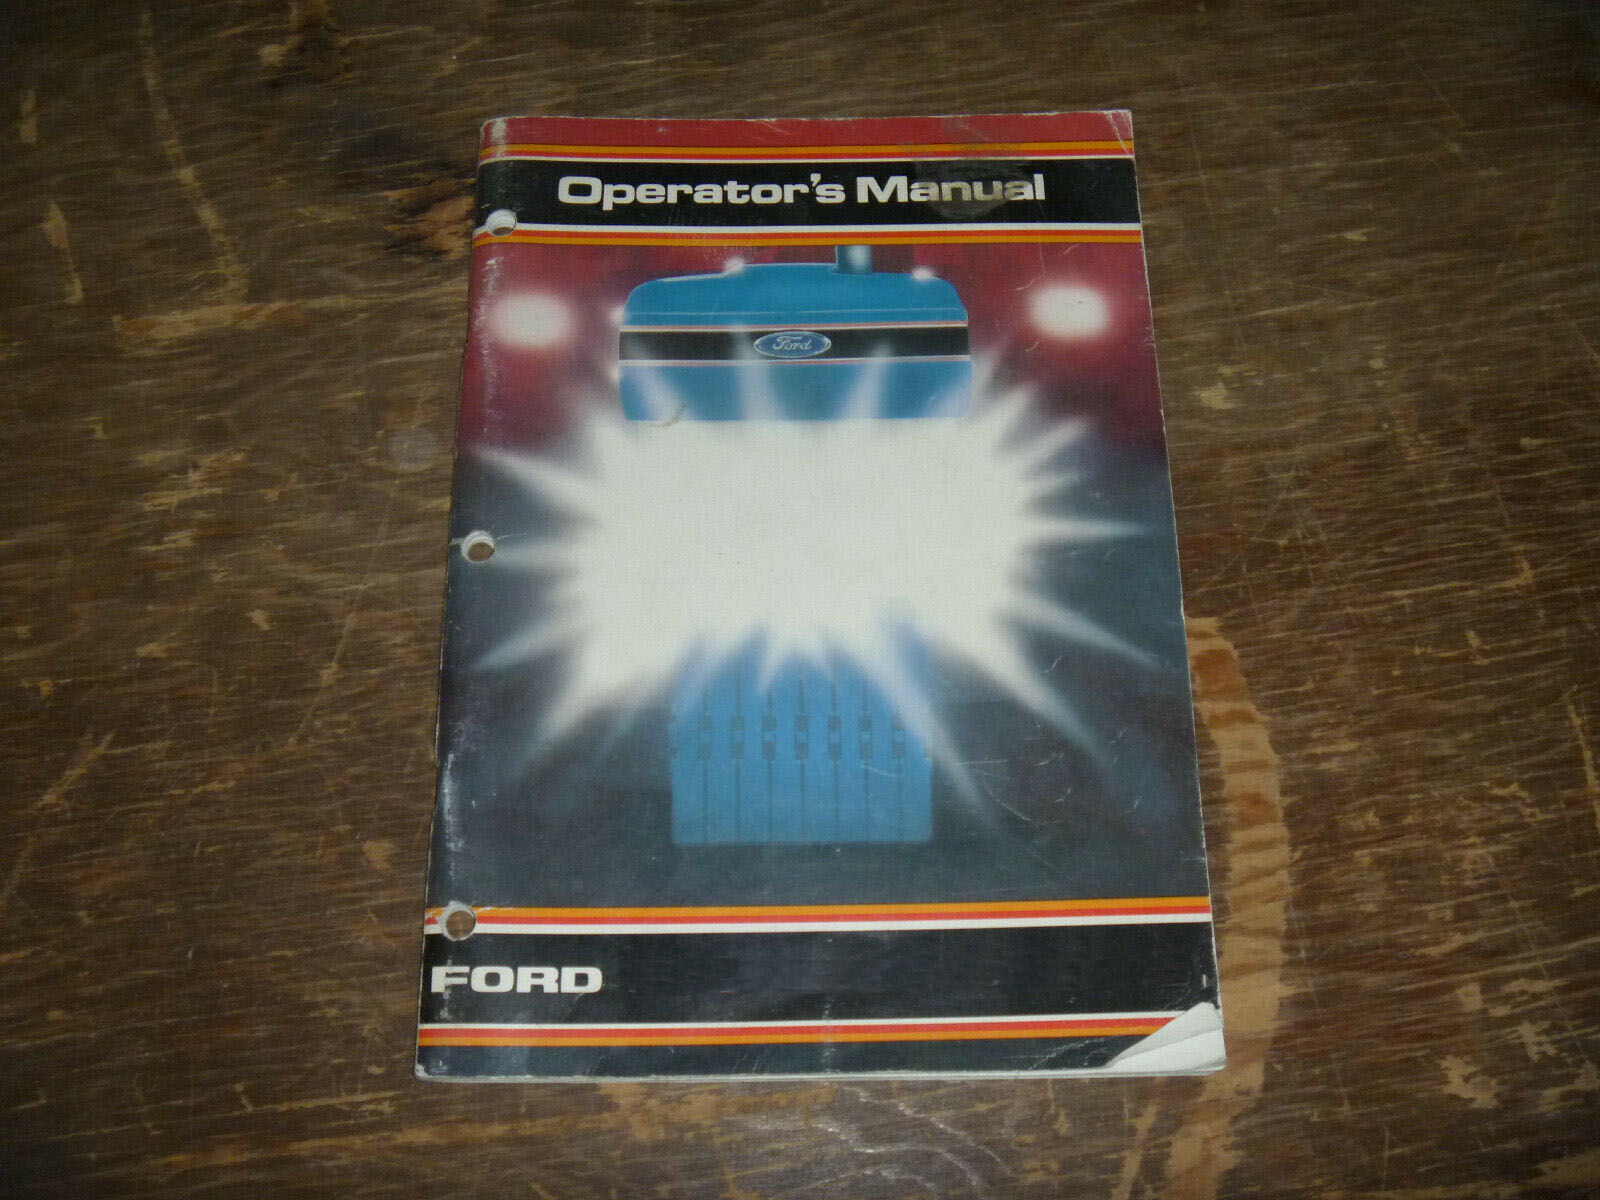 Operator's Manual for FORD Tractors model 445